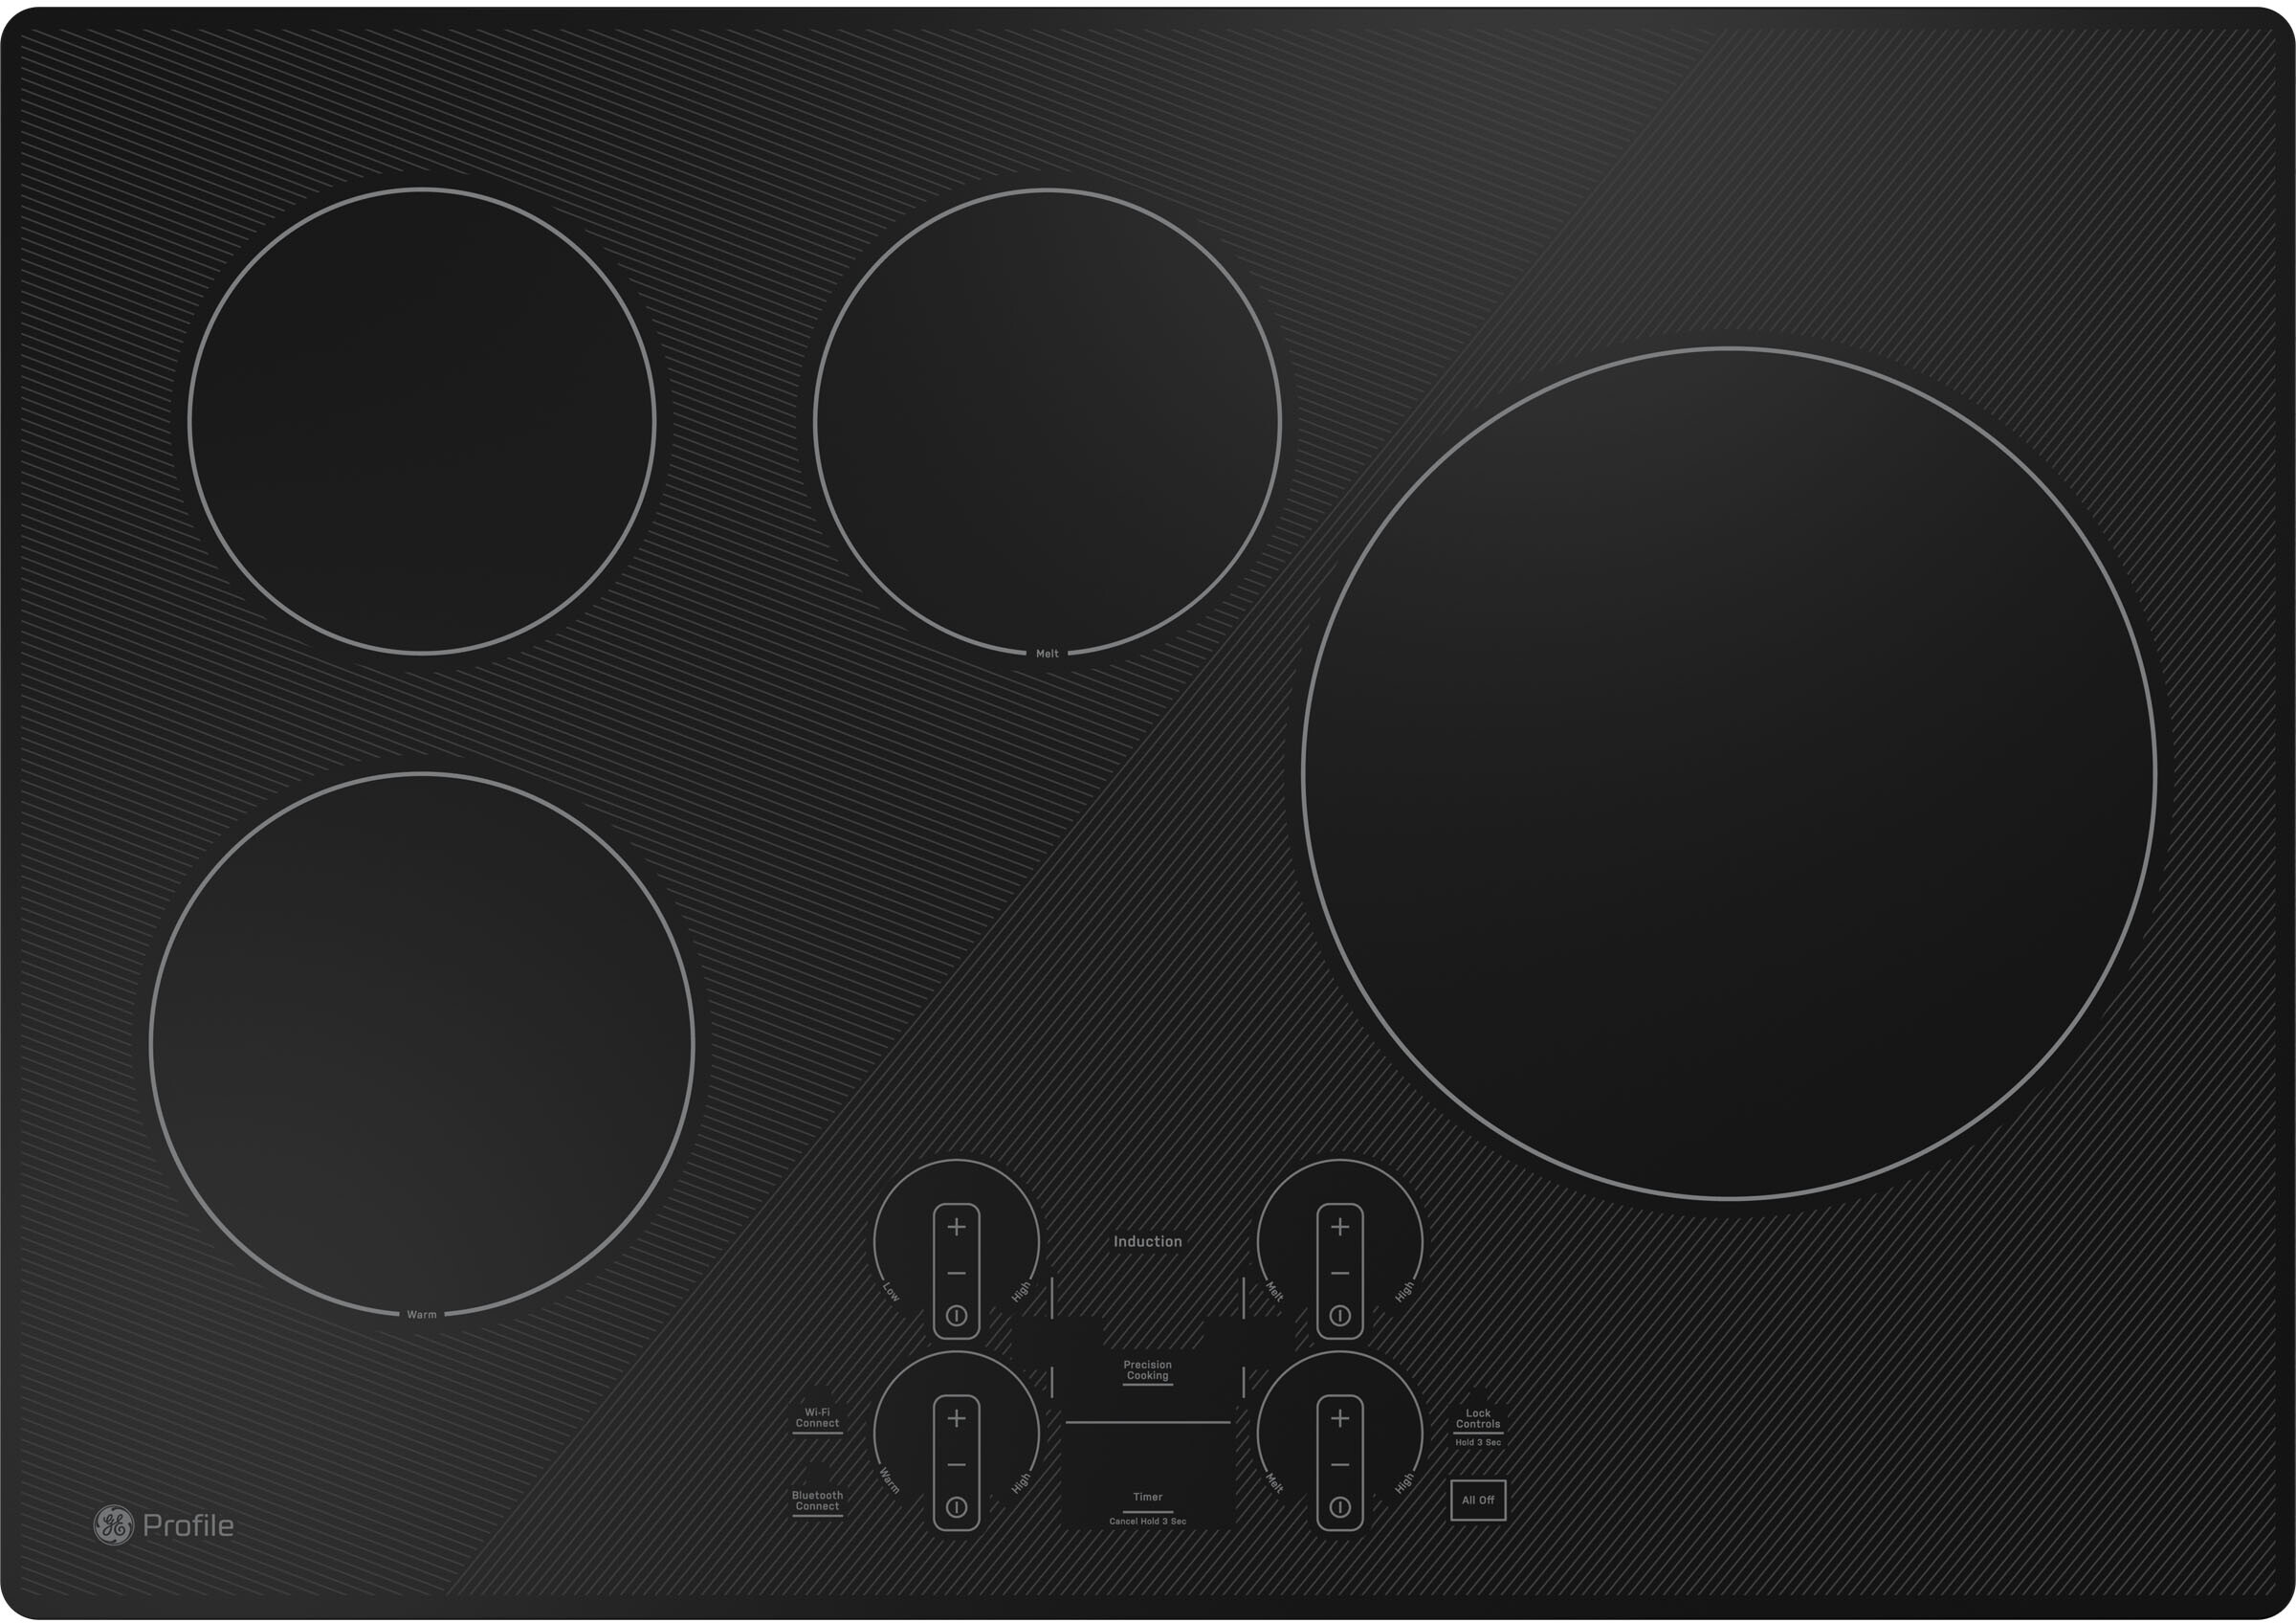 Profile 30"" Induction Drop-In Cooktop - GE PHP7030DTBB